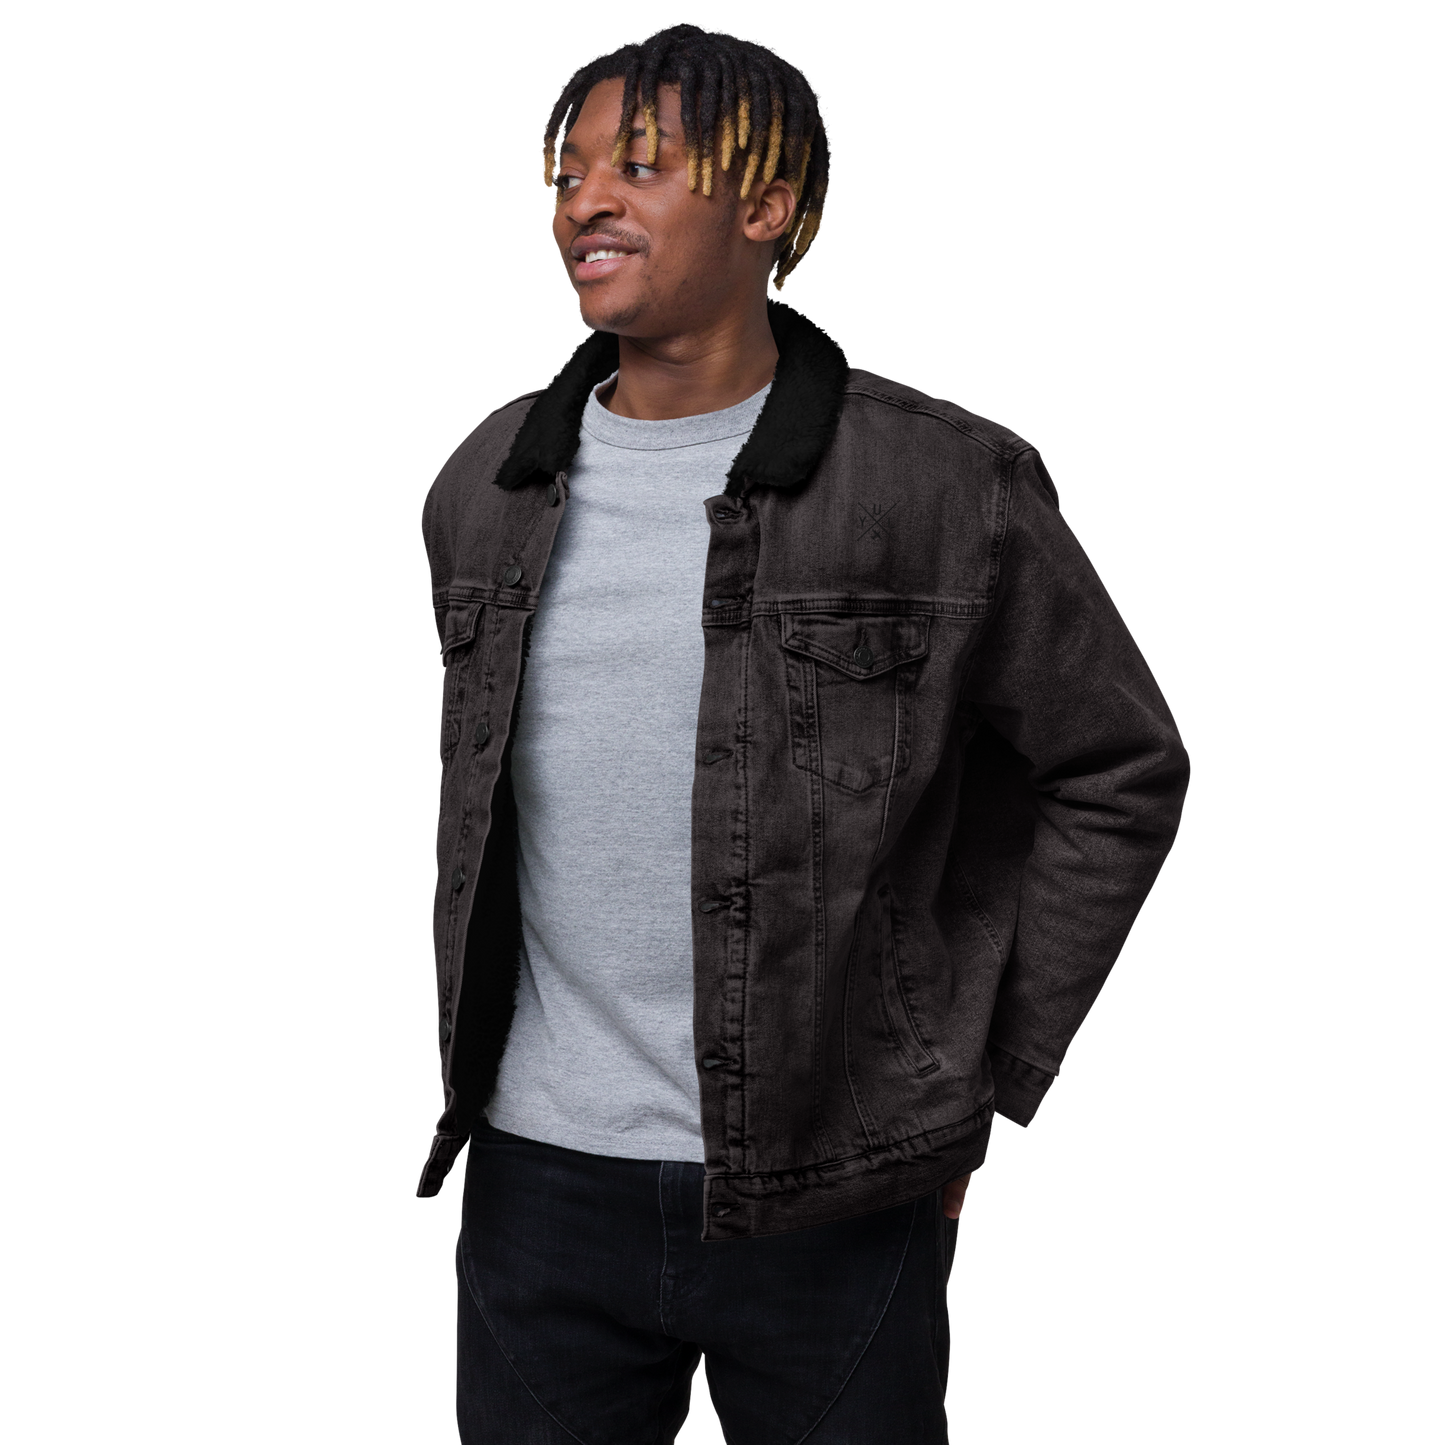 YHM Designs - YUL Montreal Denim Sherpa Jacket - Crossed-X Design with Airport Code and Vintage Propliner - Black & White Embroidery - Image 08